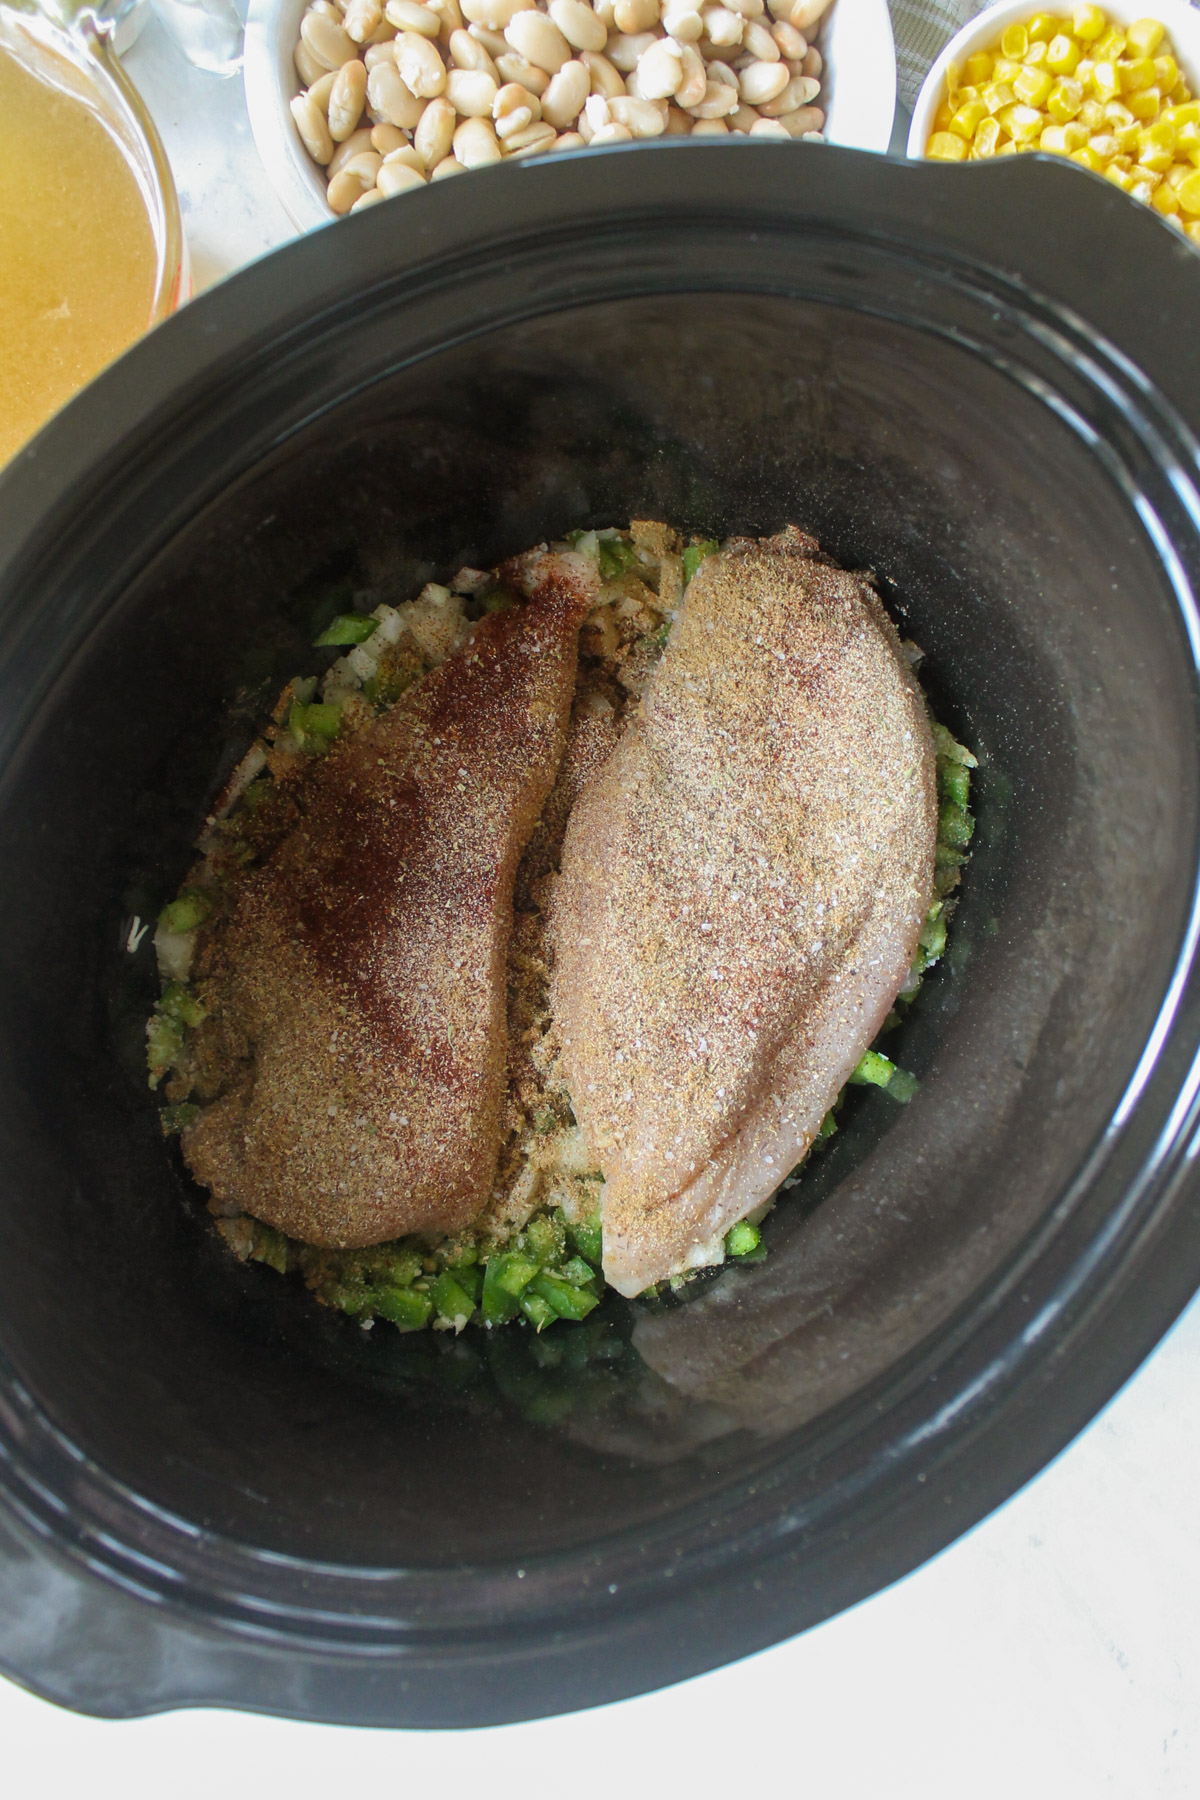 Chicken breasts with seasoning in a crockpot with onions and green peppers.